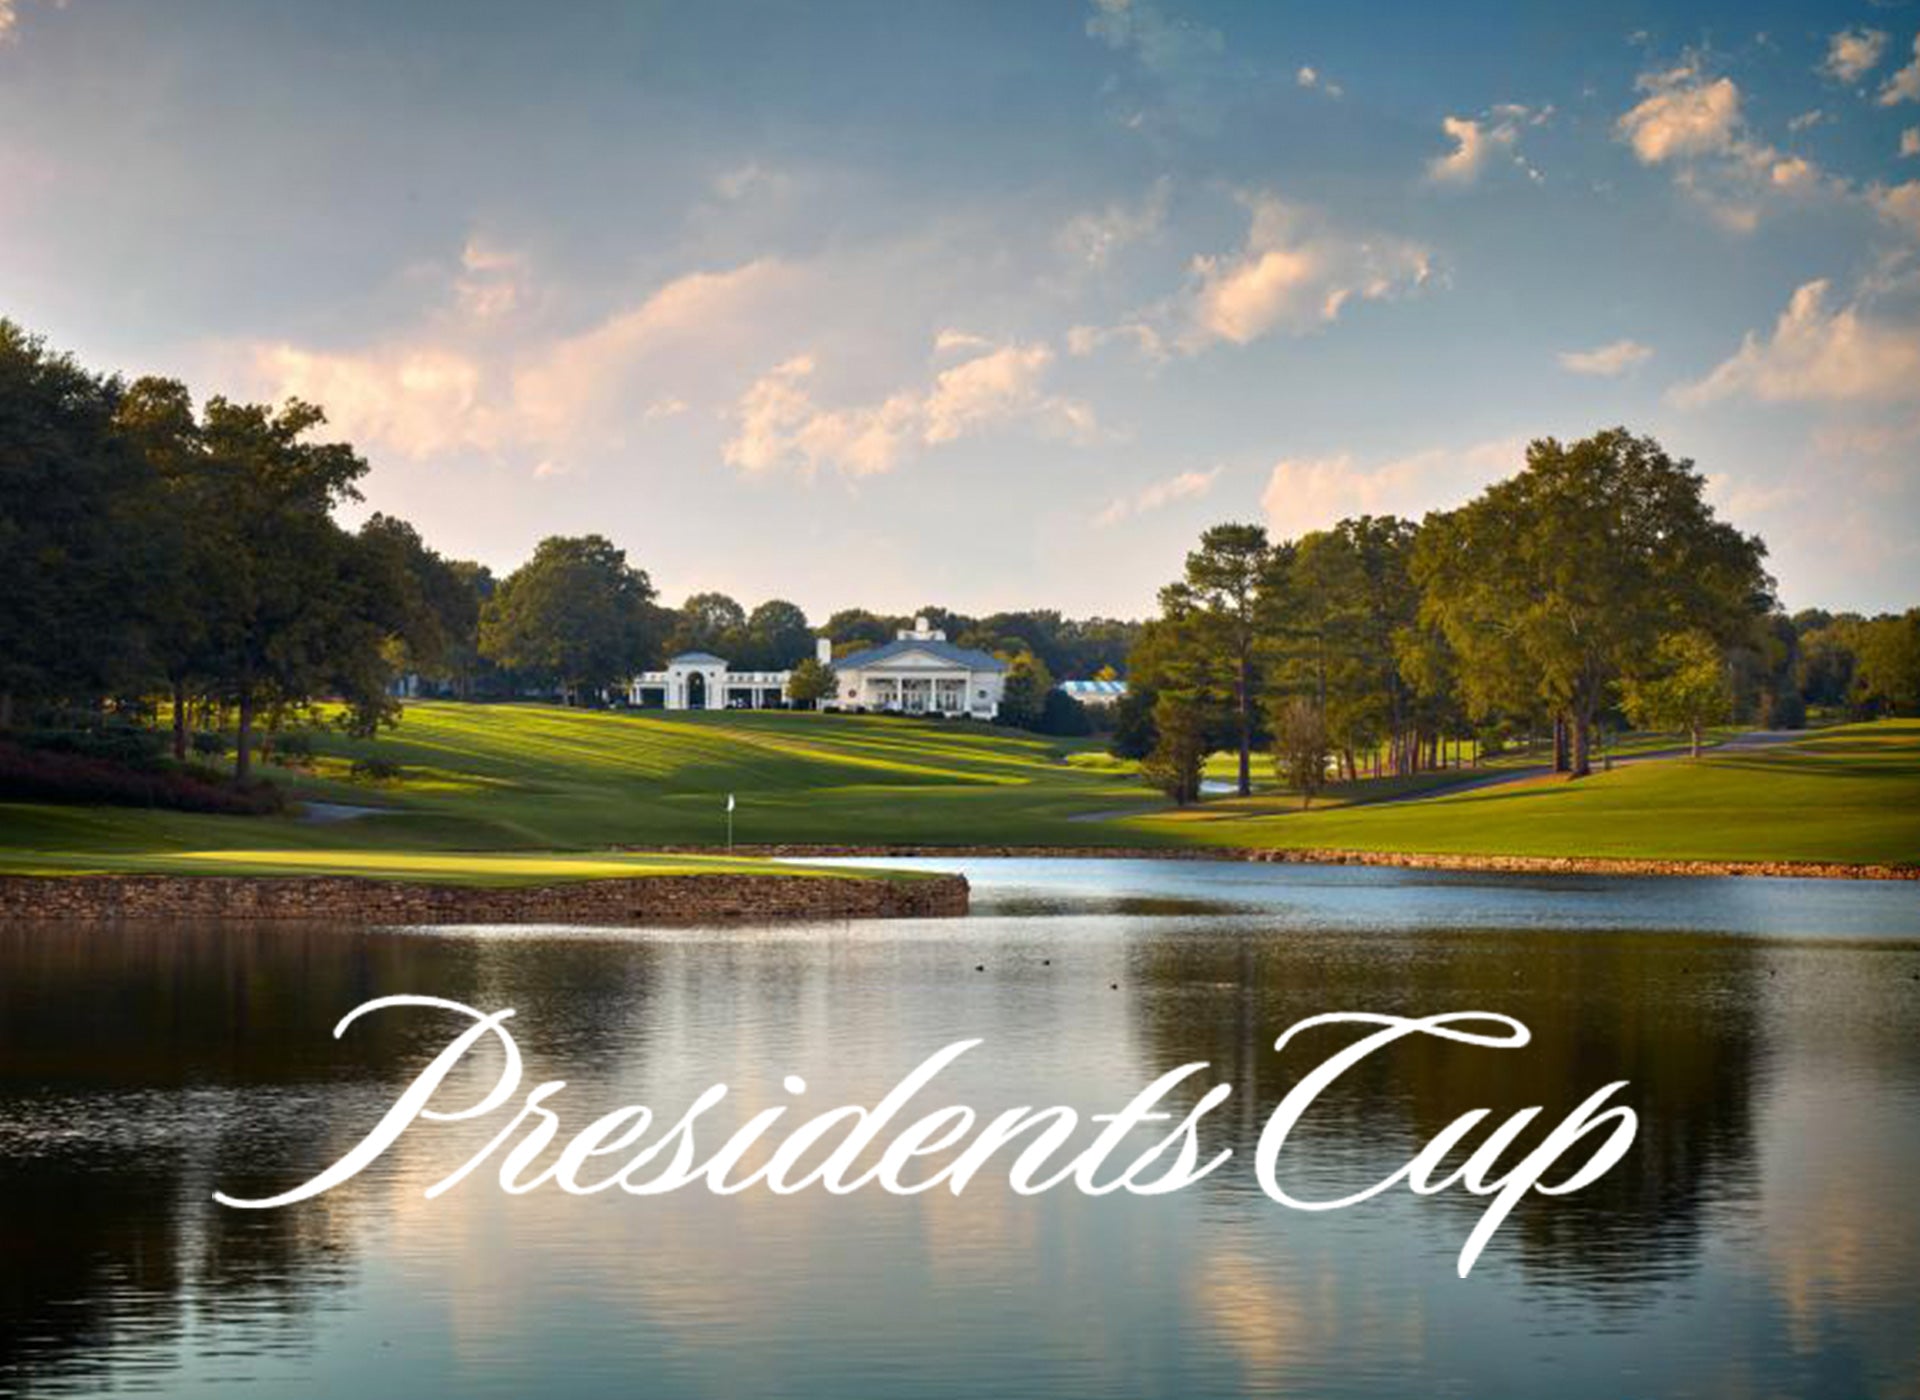 The Presidents Cup Experience Box